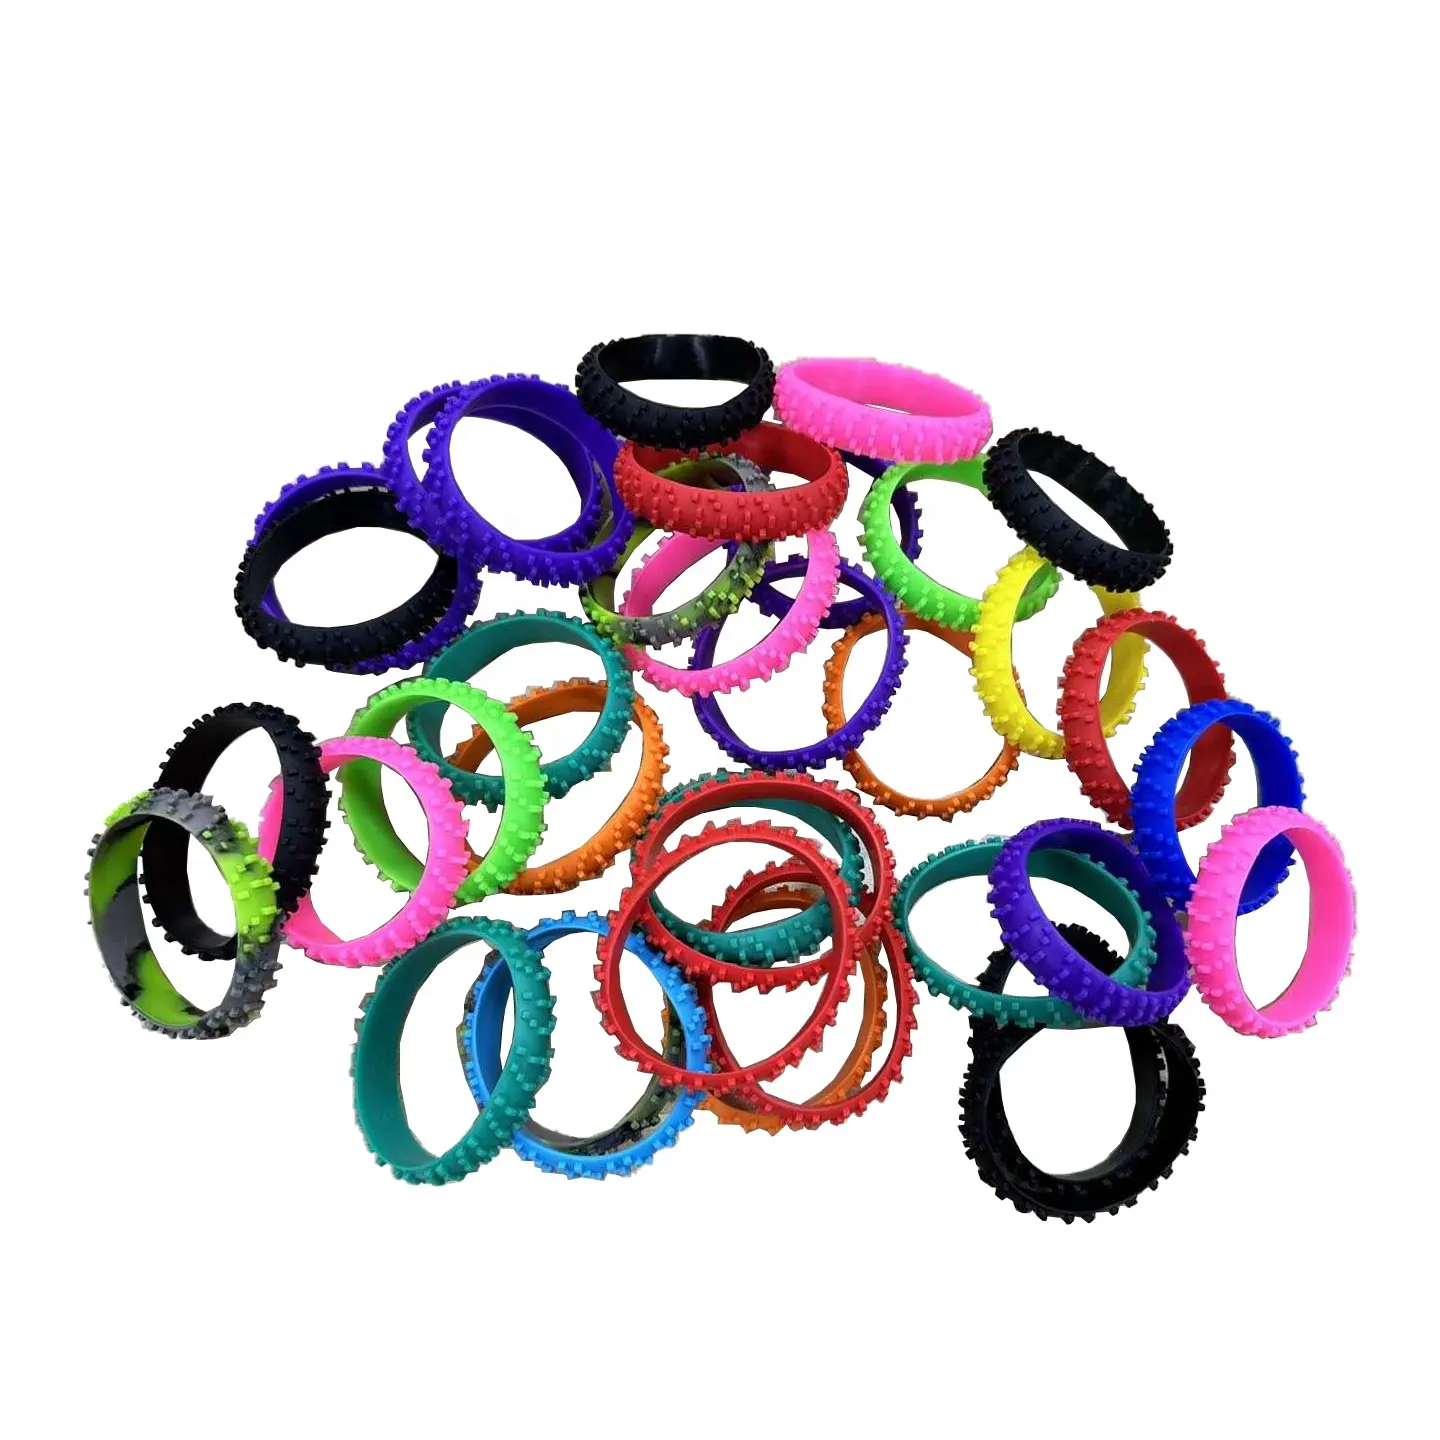 Custom LOGO Tire Wristband Special for Cycling Lover Wearing on Ride on tire silicone bracelet